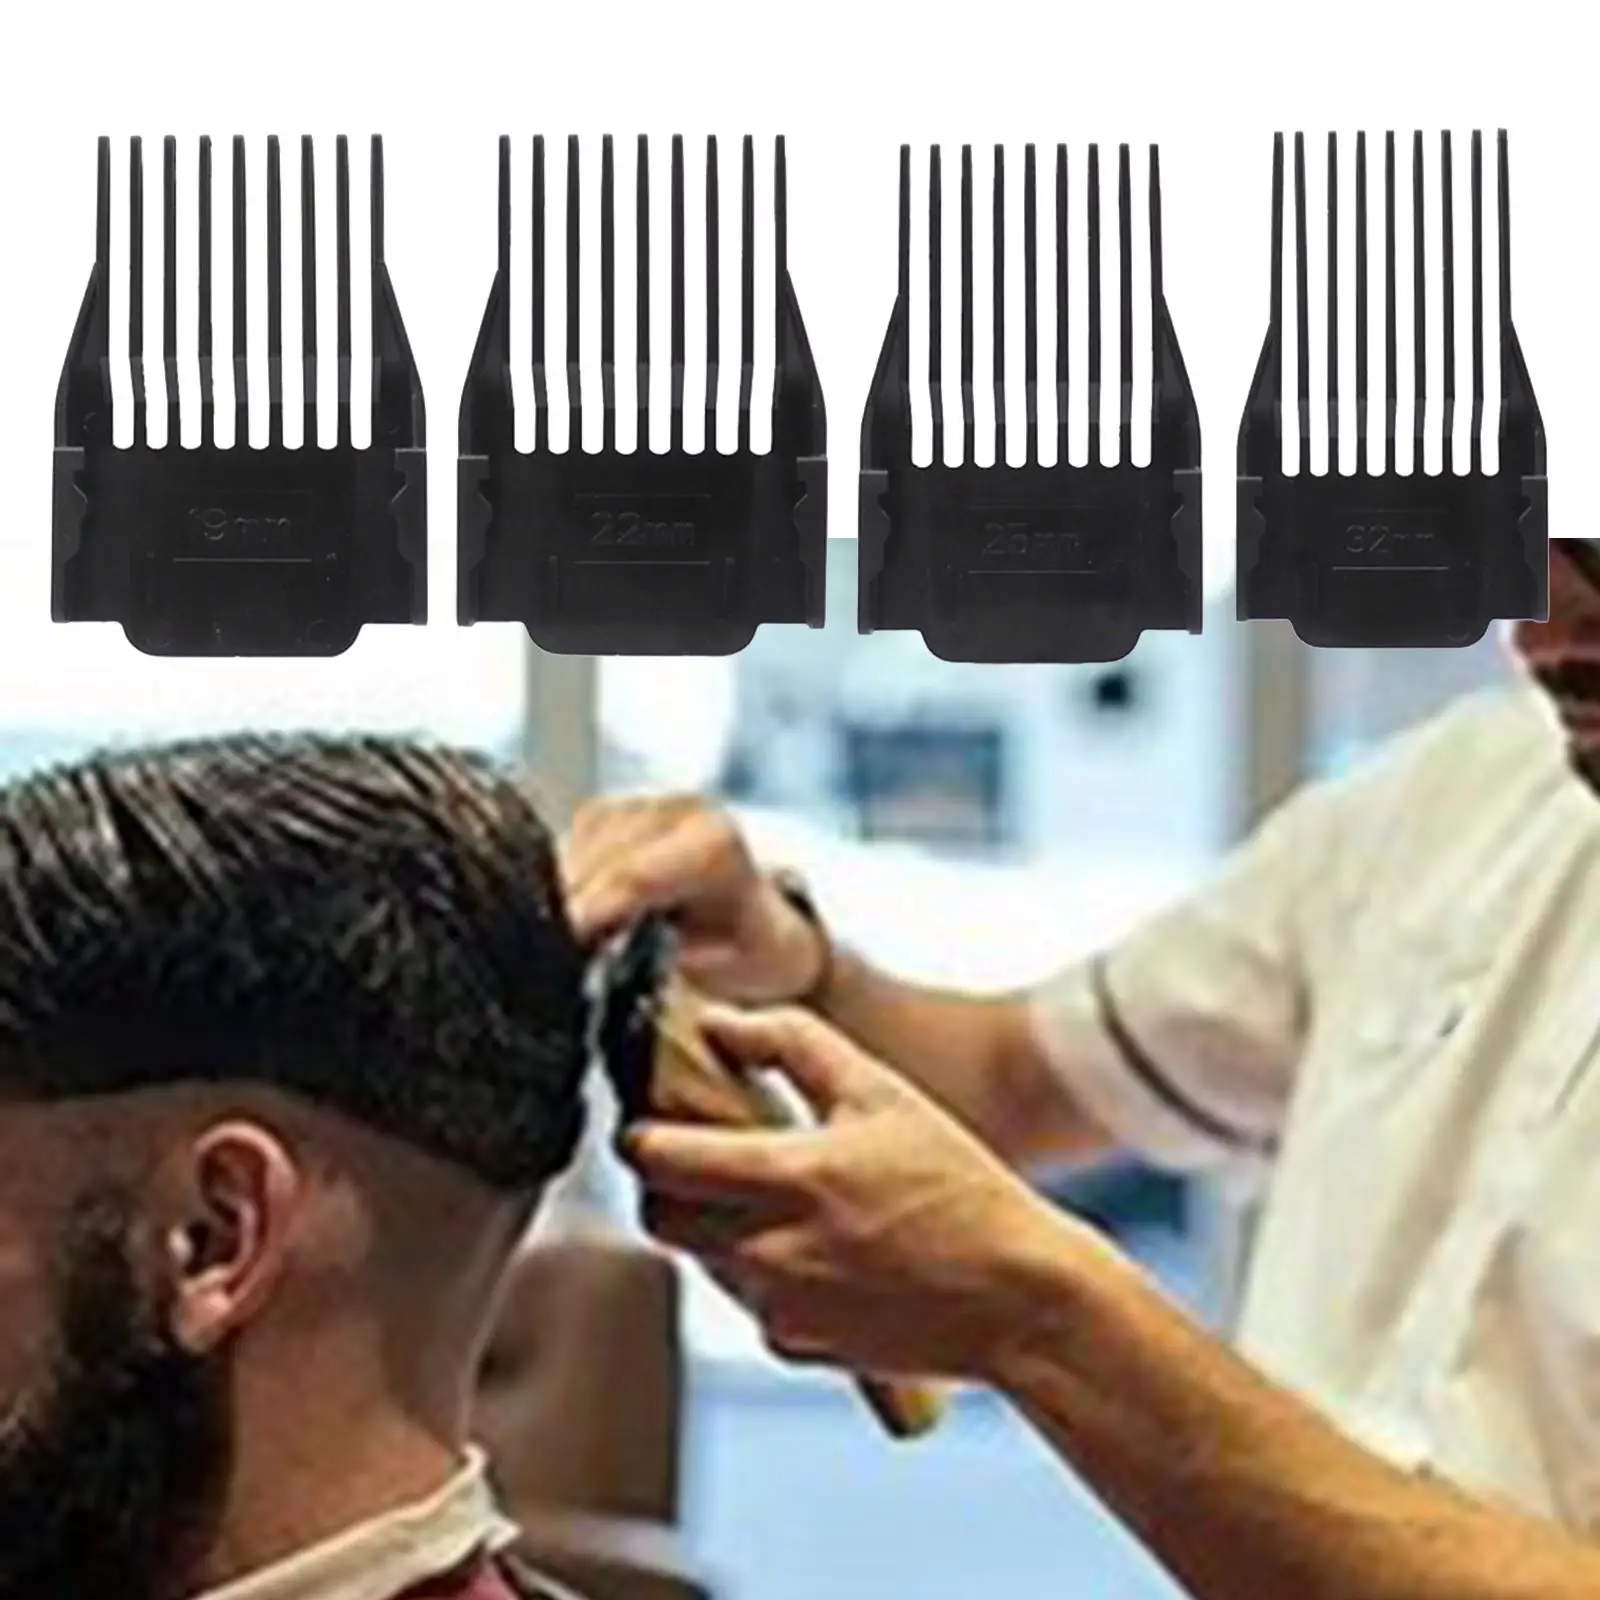 4 Pieces Hair Trimmer Clipper Guards Guide Combs Hair Clipper Limit Comb for Stylists and Barbers